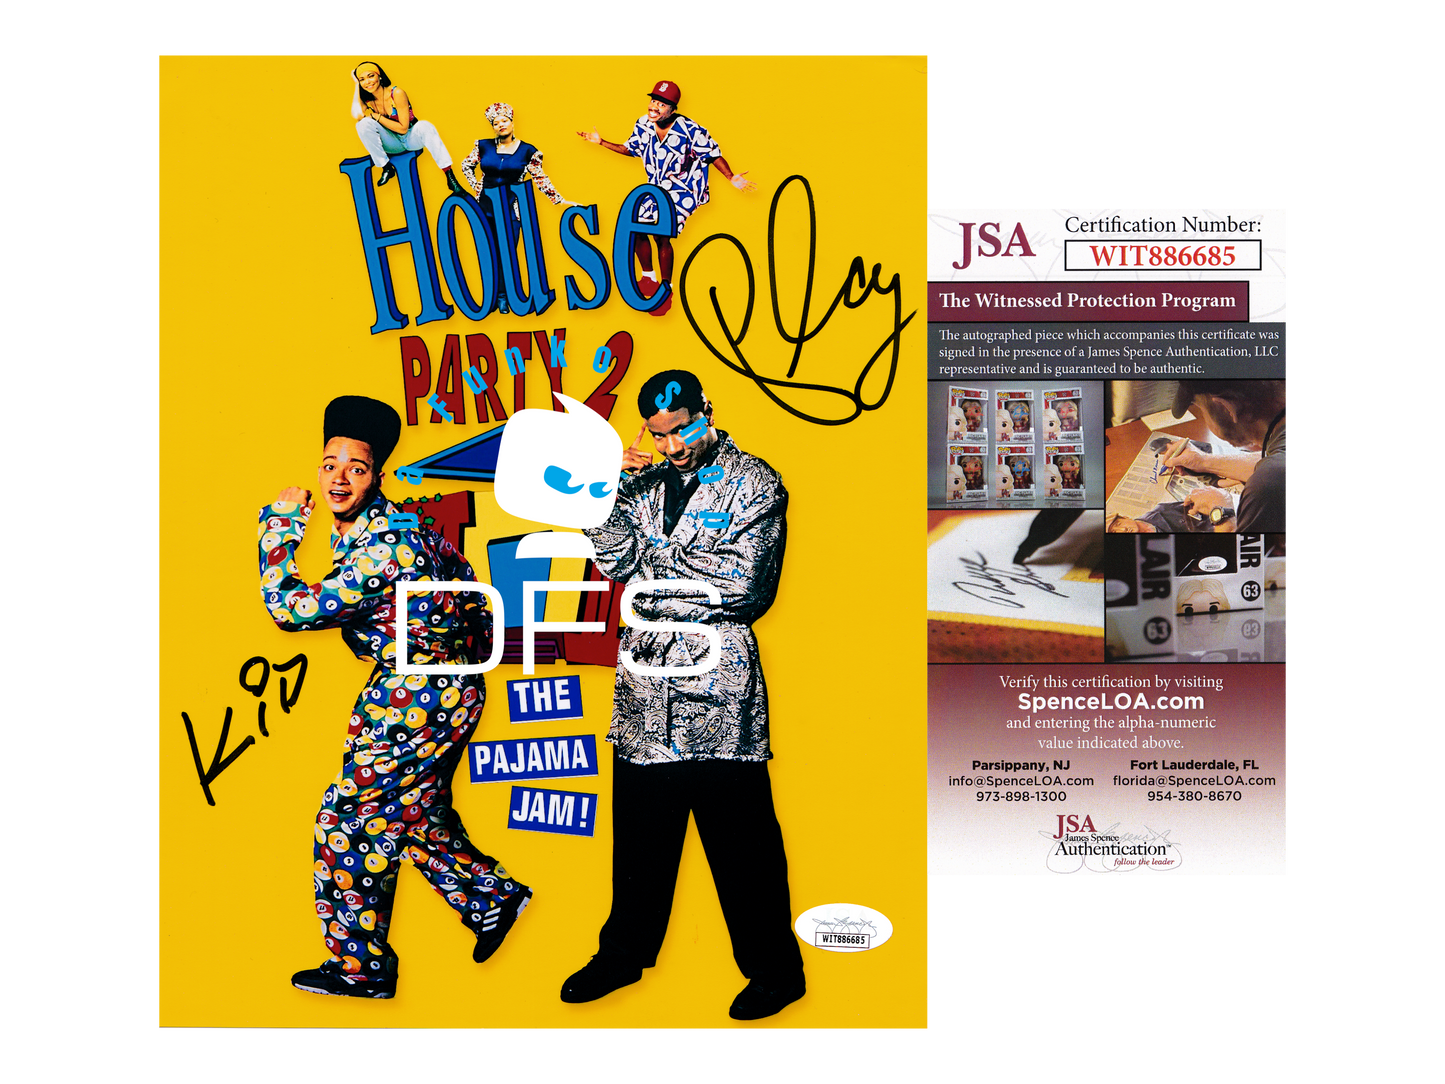 Kid n Play Signed House Party 2 The Pajama Party 8x10 Photo Poster Christopher Reid & Christopher Martin Signatures Are Authenticated By JSA ✅ - DaFunkoShop - Autographed memorabilia.